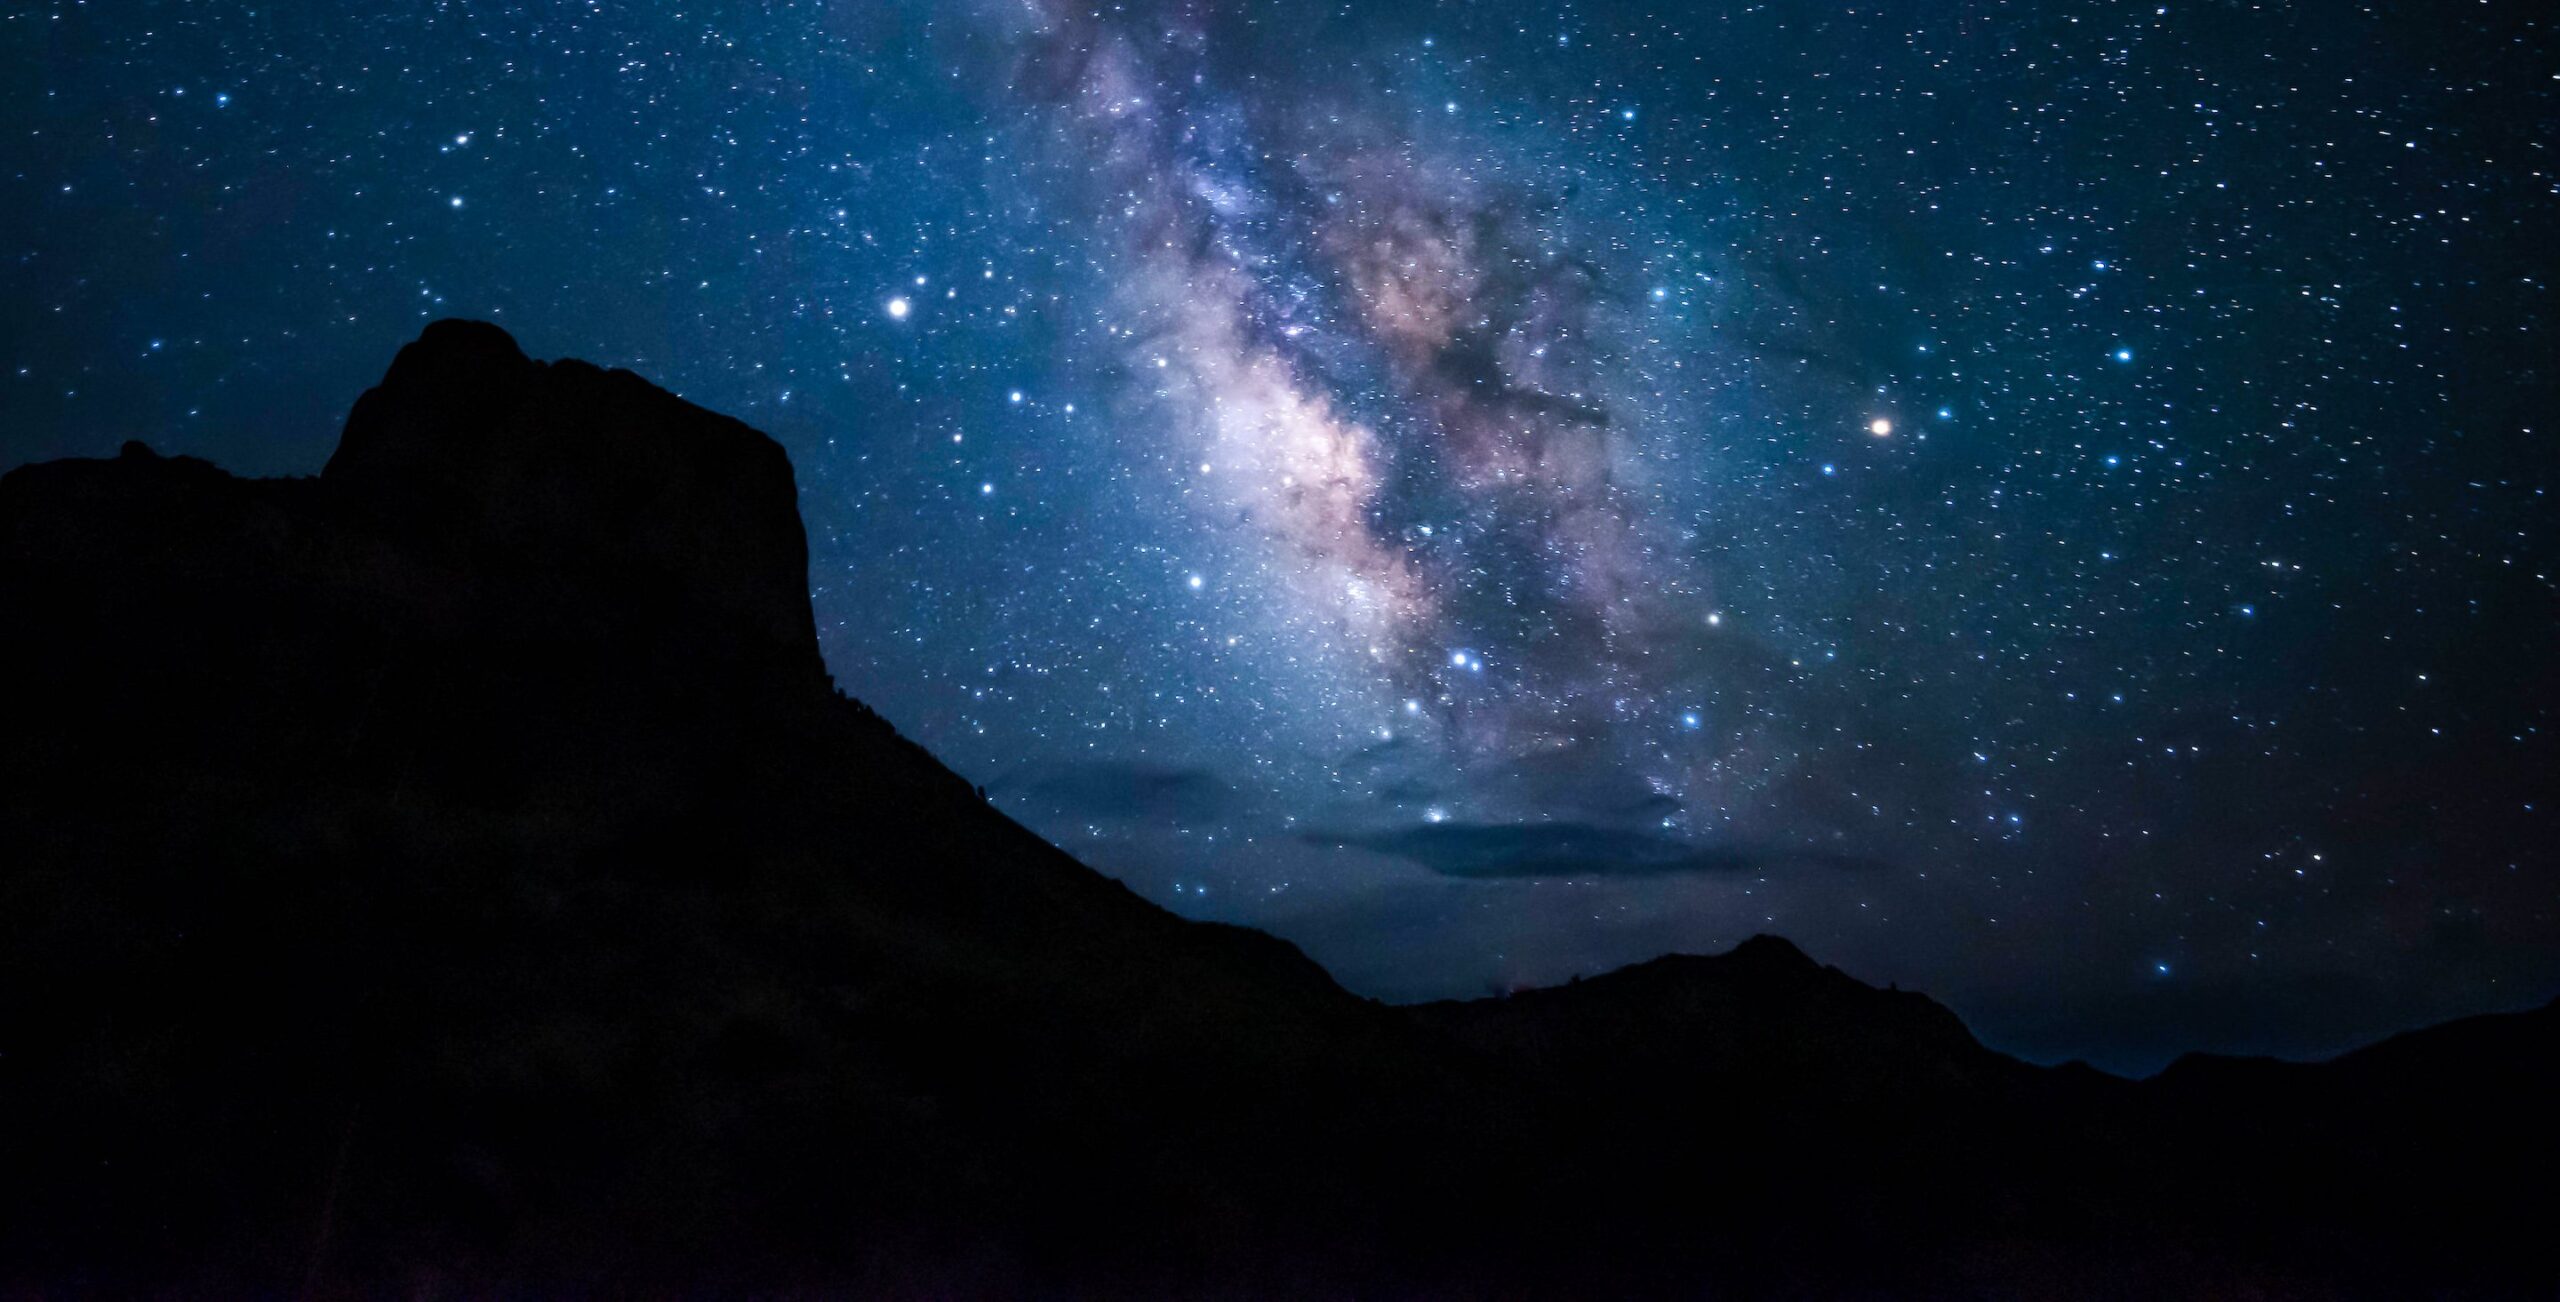 The 7 Most Incredible Stargazing Sites In The U.S. | TravelAwaits